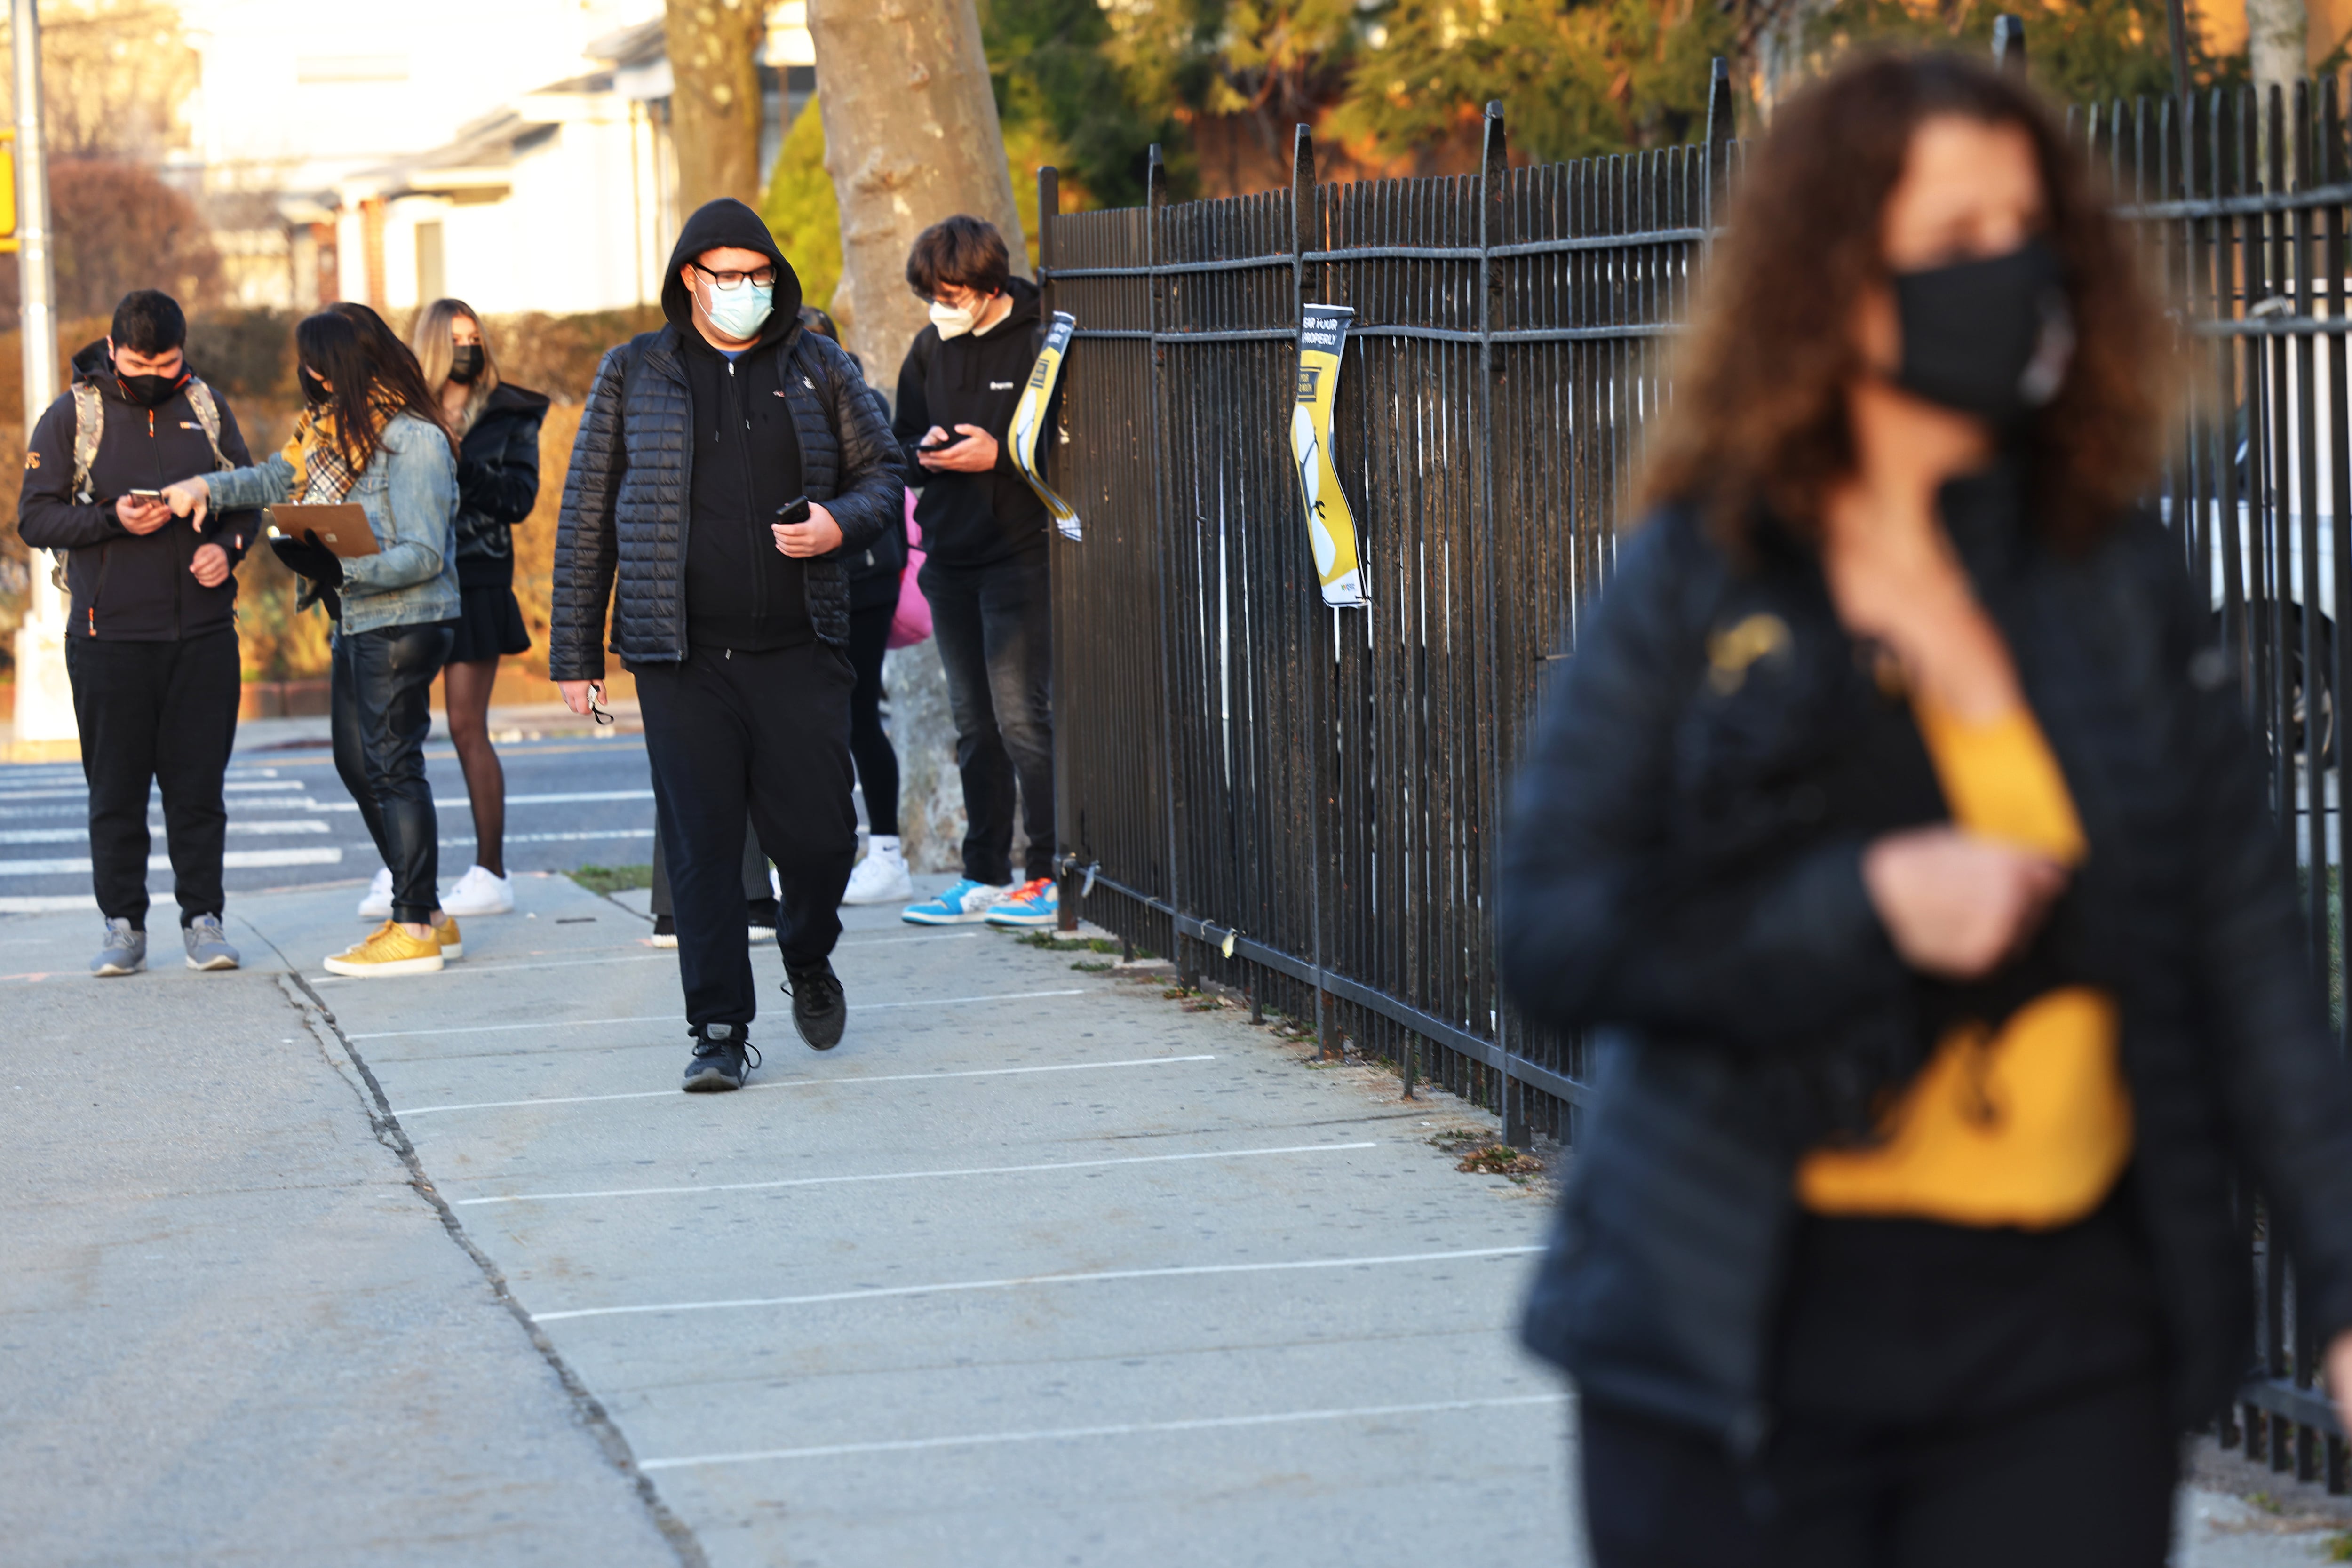 Teens wearing puffy coats and masks walk by a fence in front of a school.